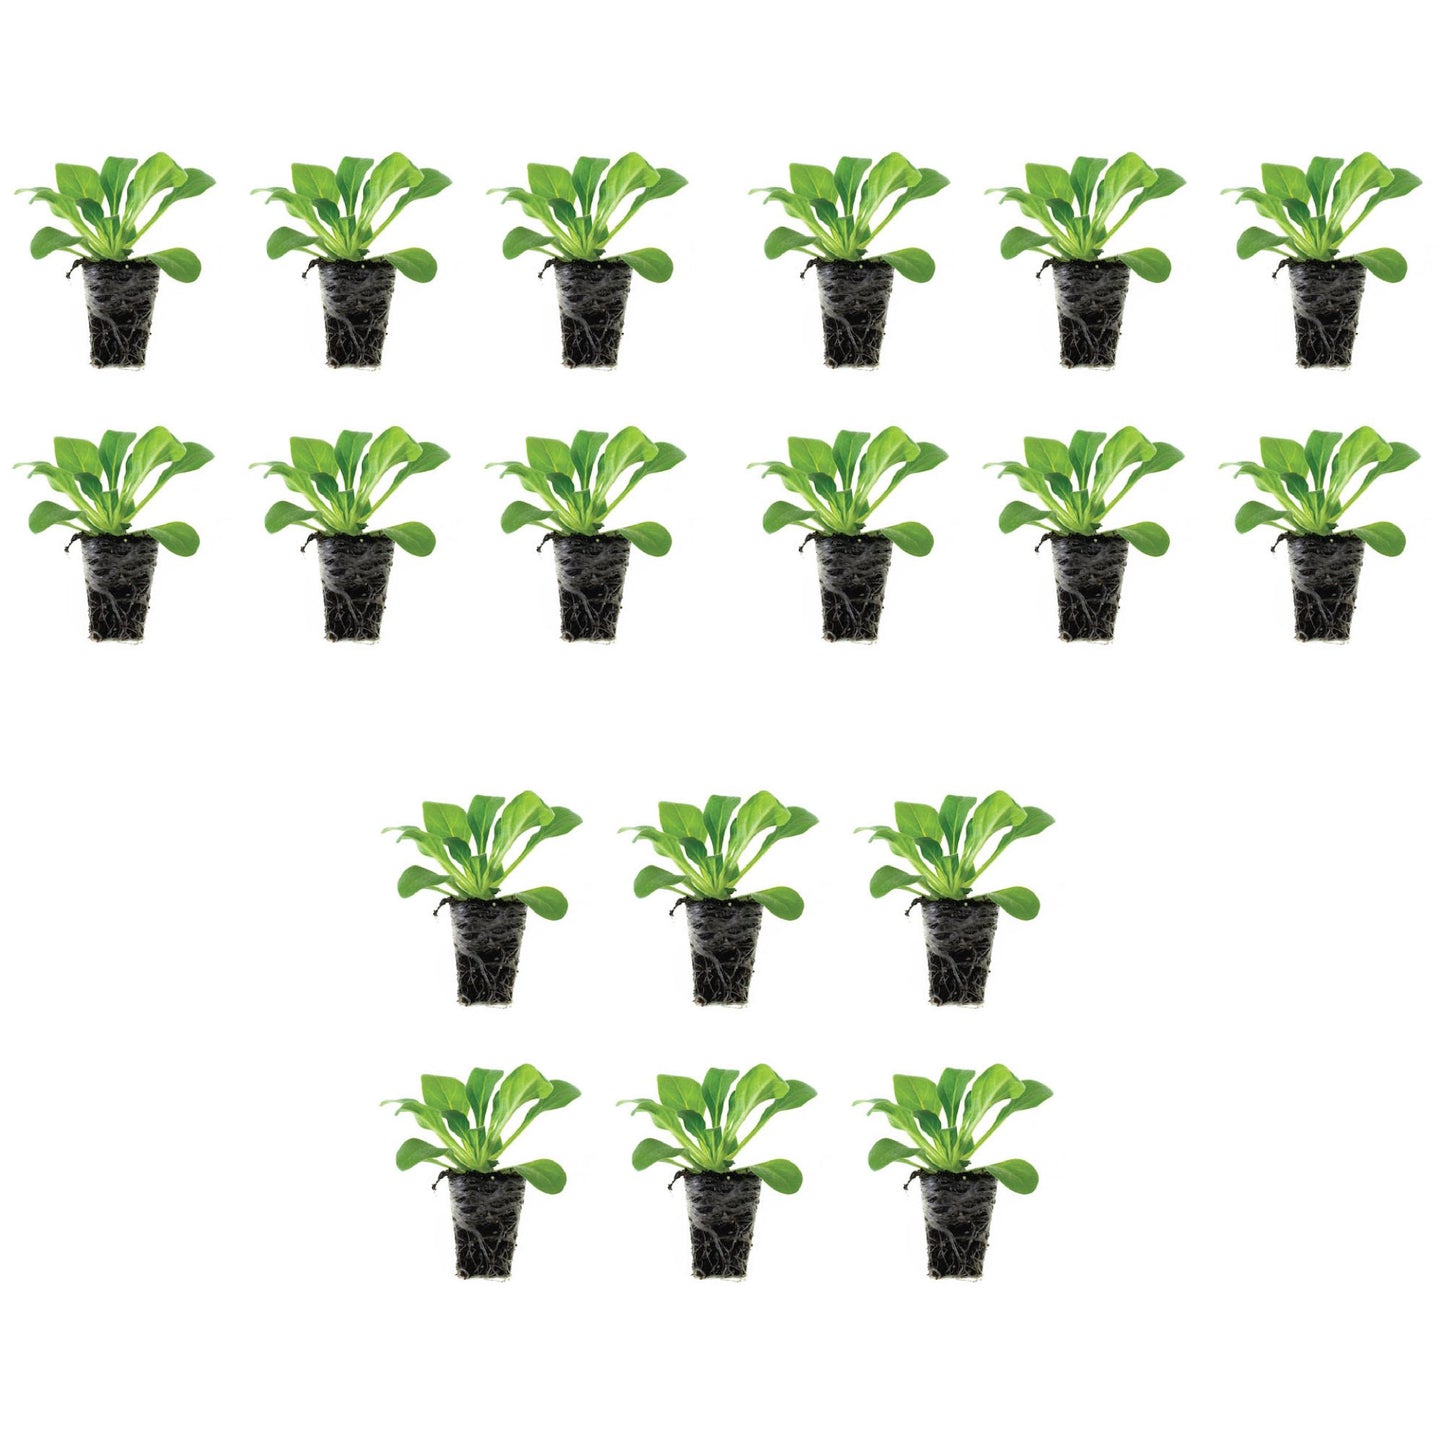 Petunia E3 Easy Wave® Sweet Taffy Mix Plantlings Kit Live Baby Plants 1-3in., 18-Pack